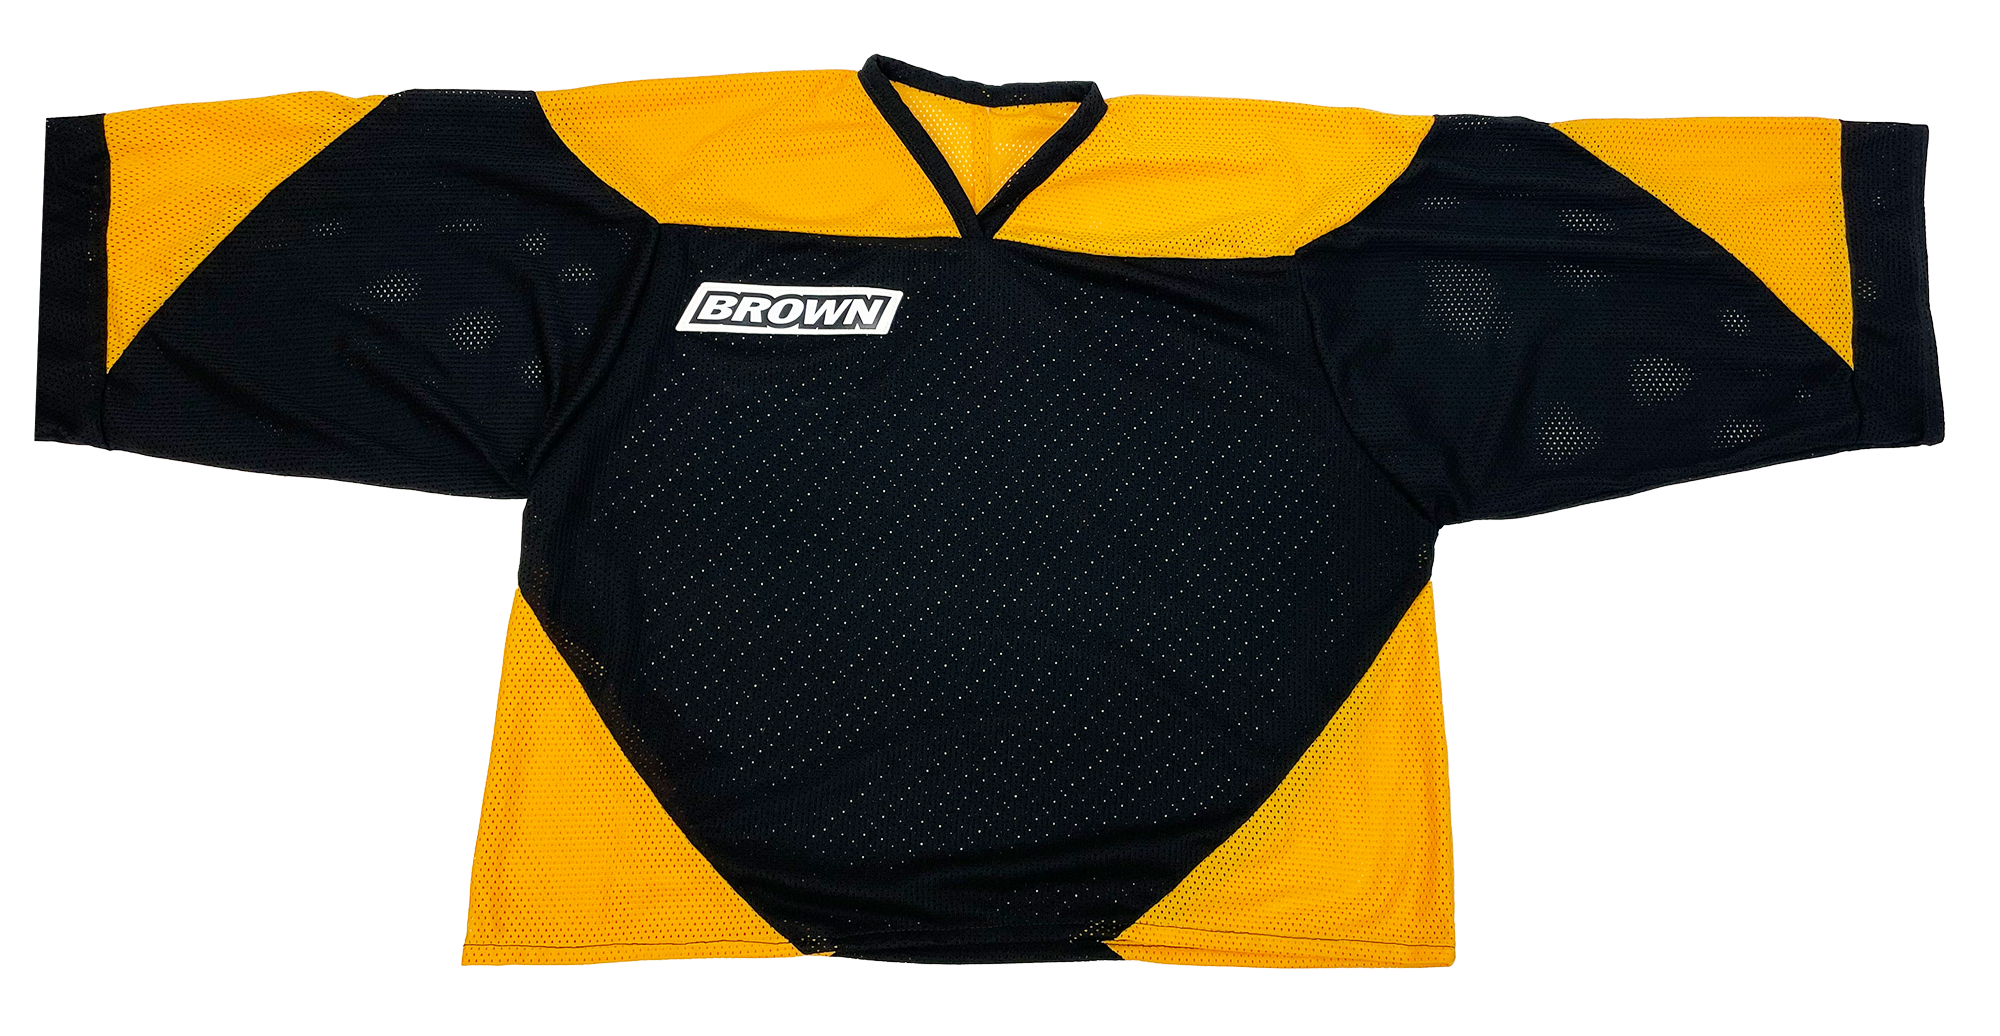 2400 jersey in black and sport gold laying flat